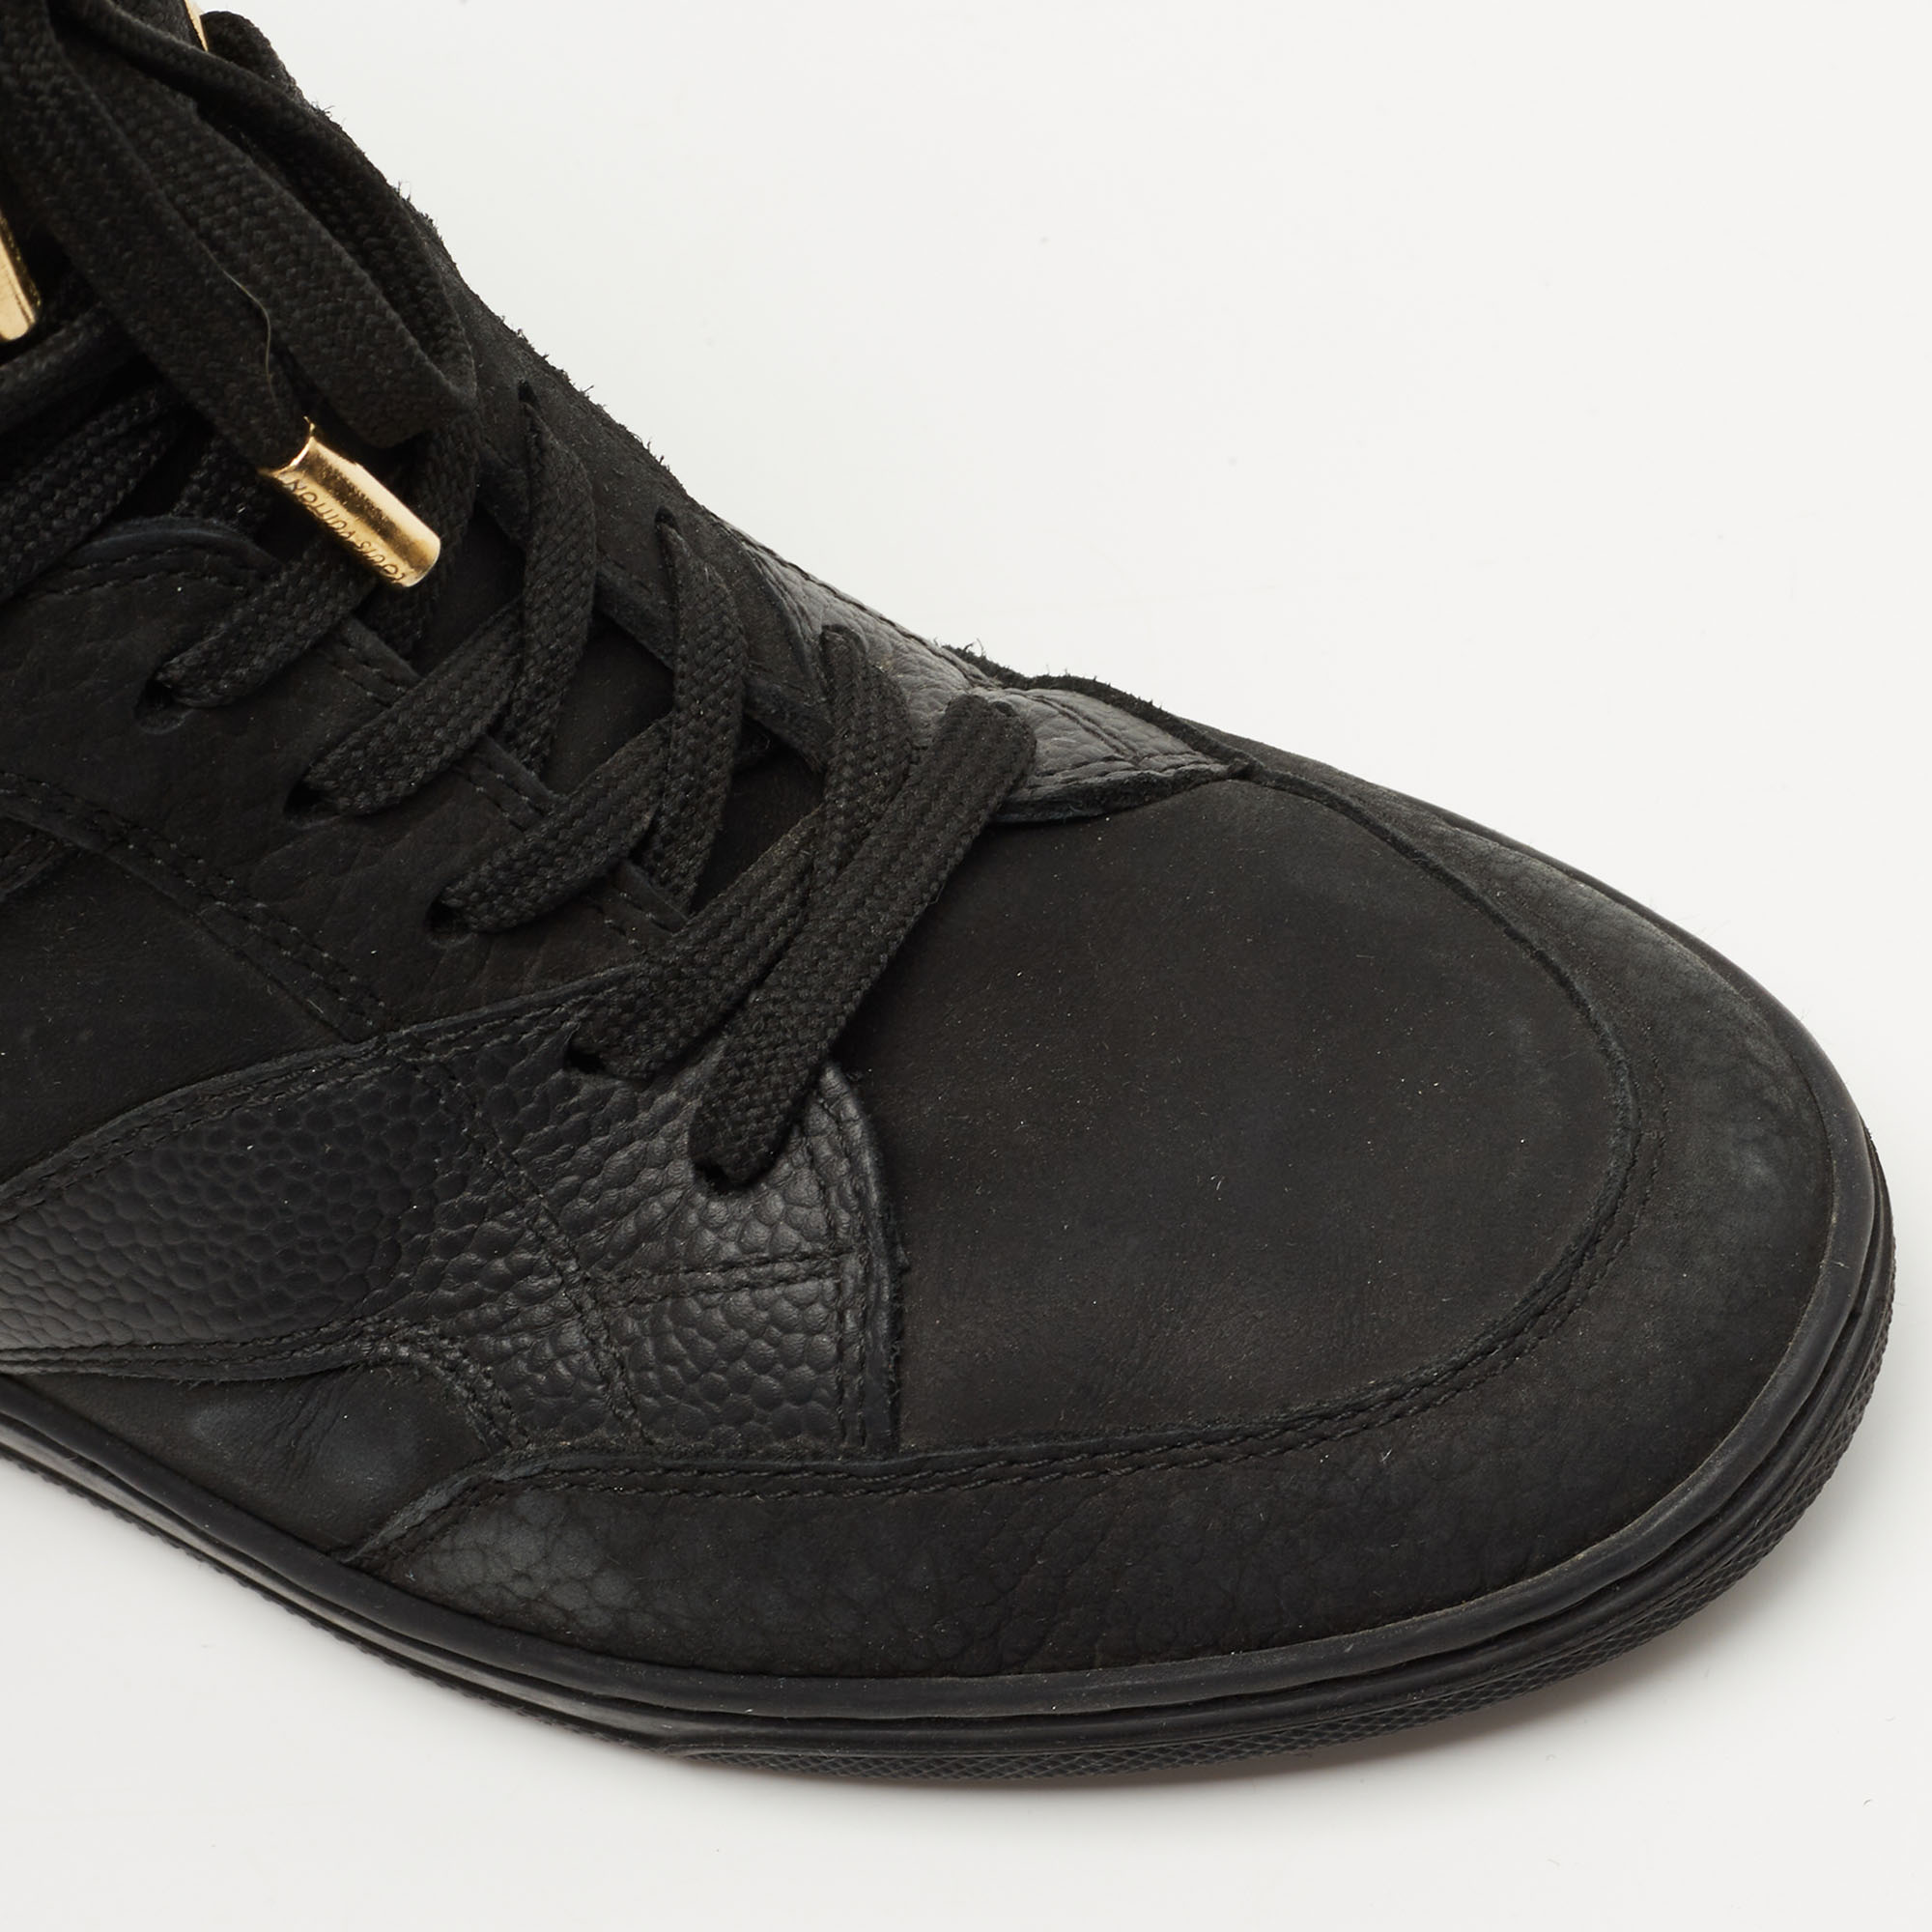 Louis Vuitton Black Leather And Embossed Monogram Suede Cliff Top Sneakers Size 37